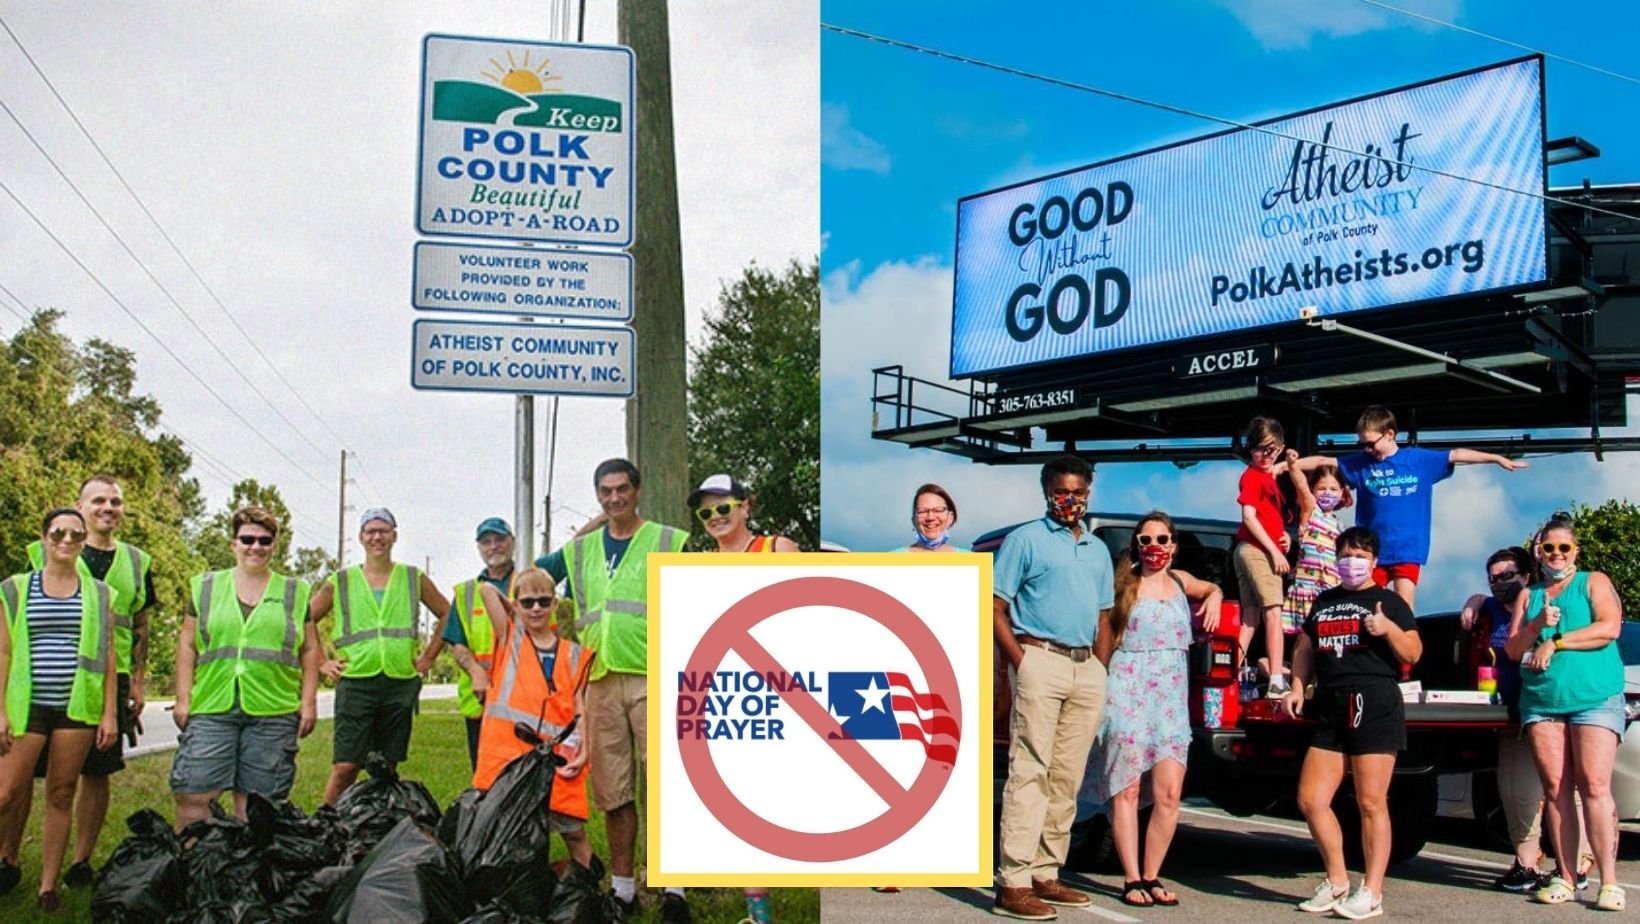 1 128.jpg?resize=412,232 - Atheists Responded To National Day of Prayer With Action to Clean Up Litter & Feed The Hungry